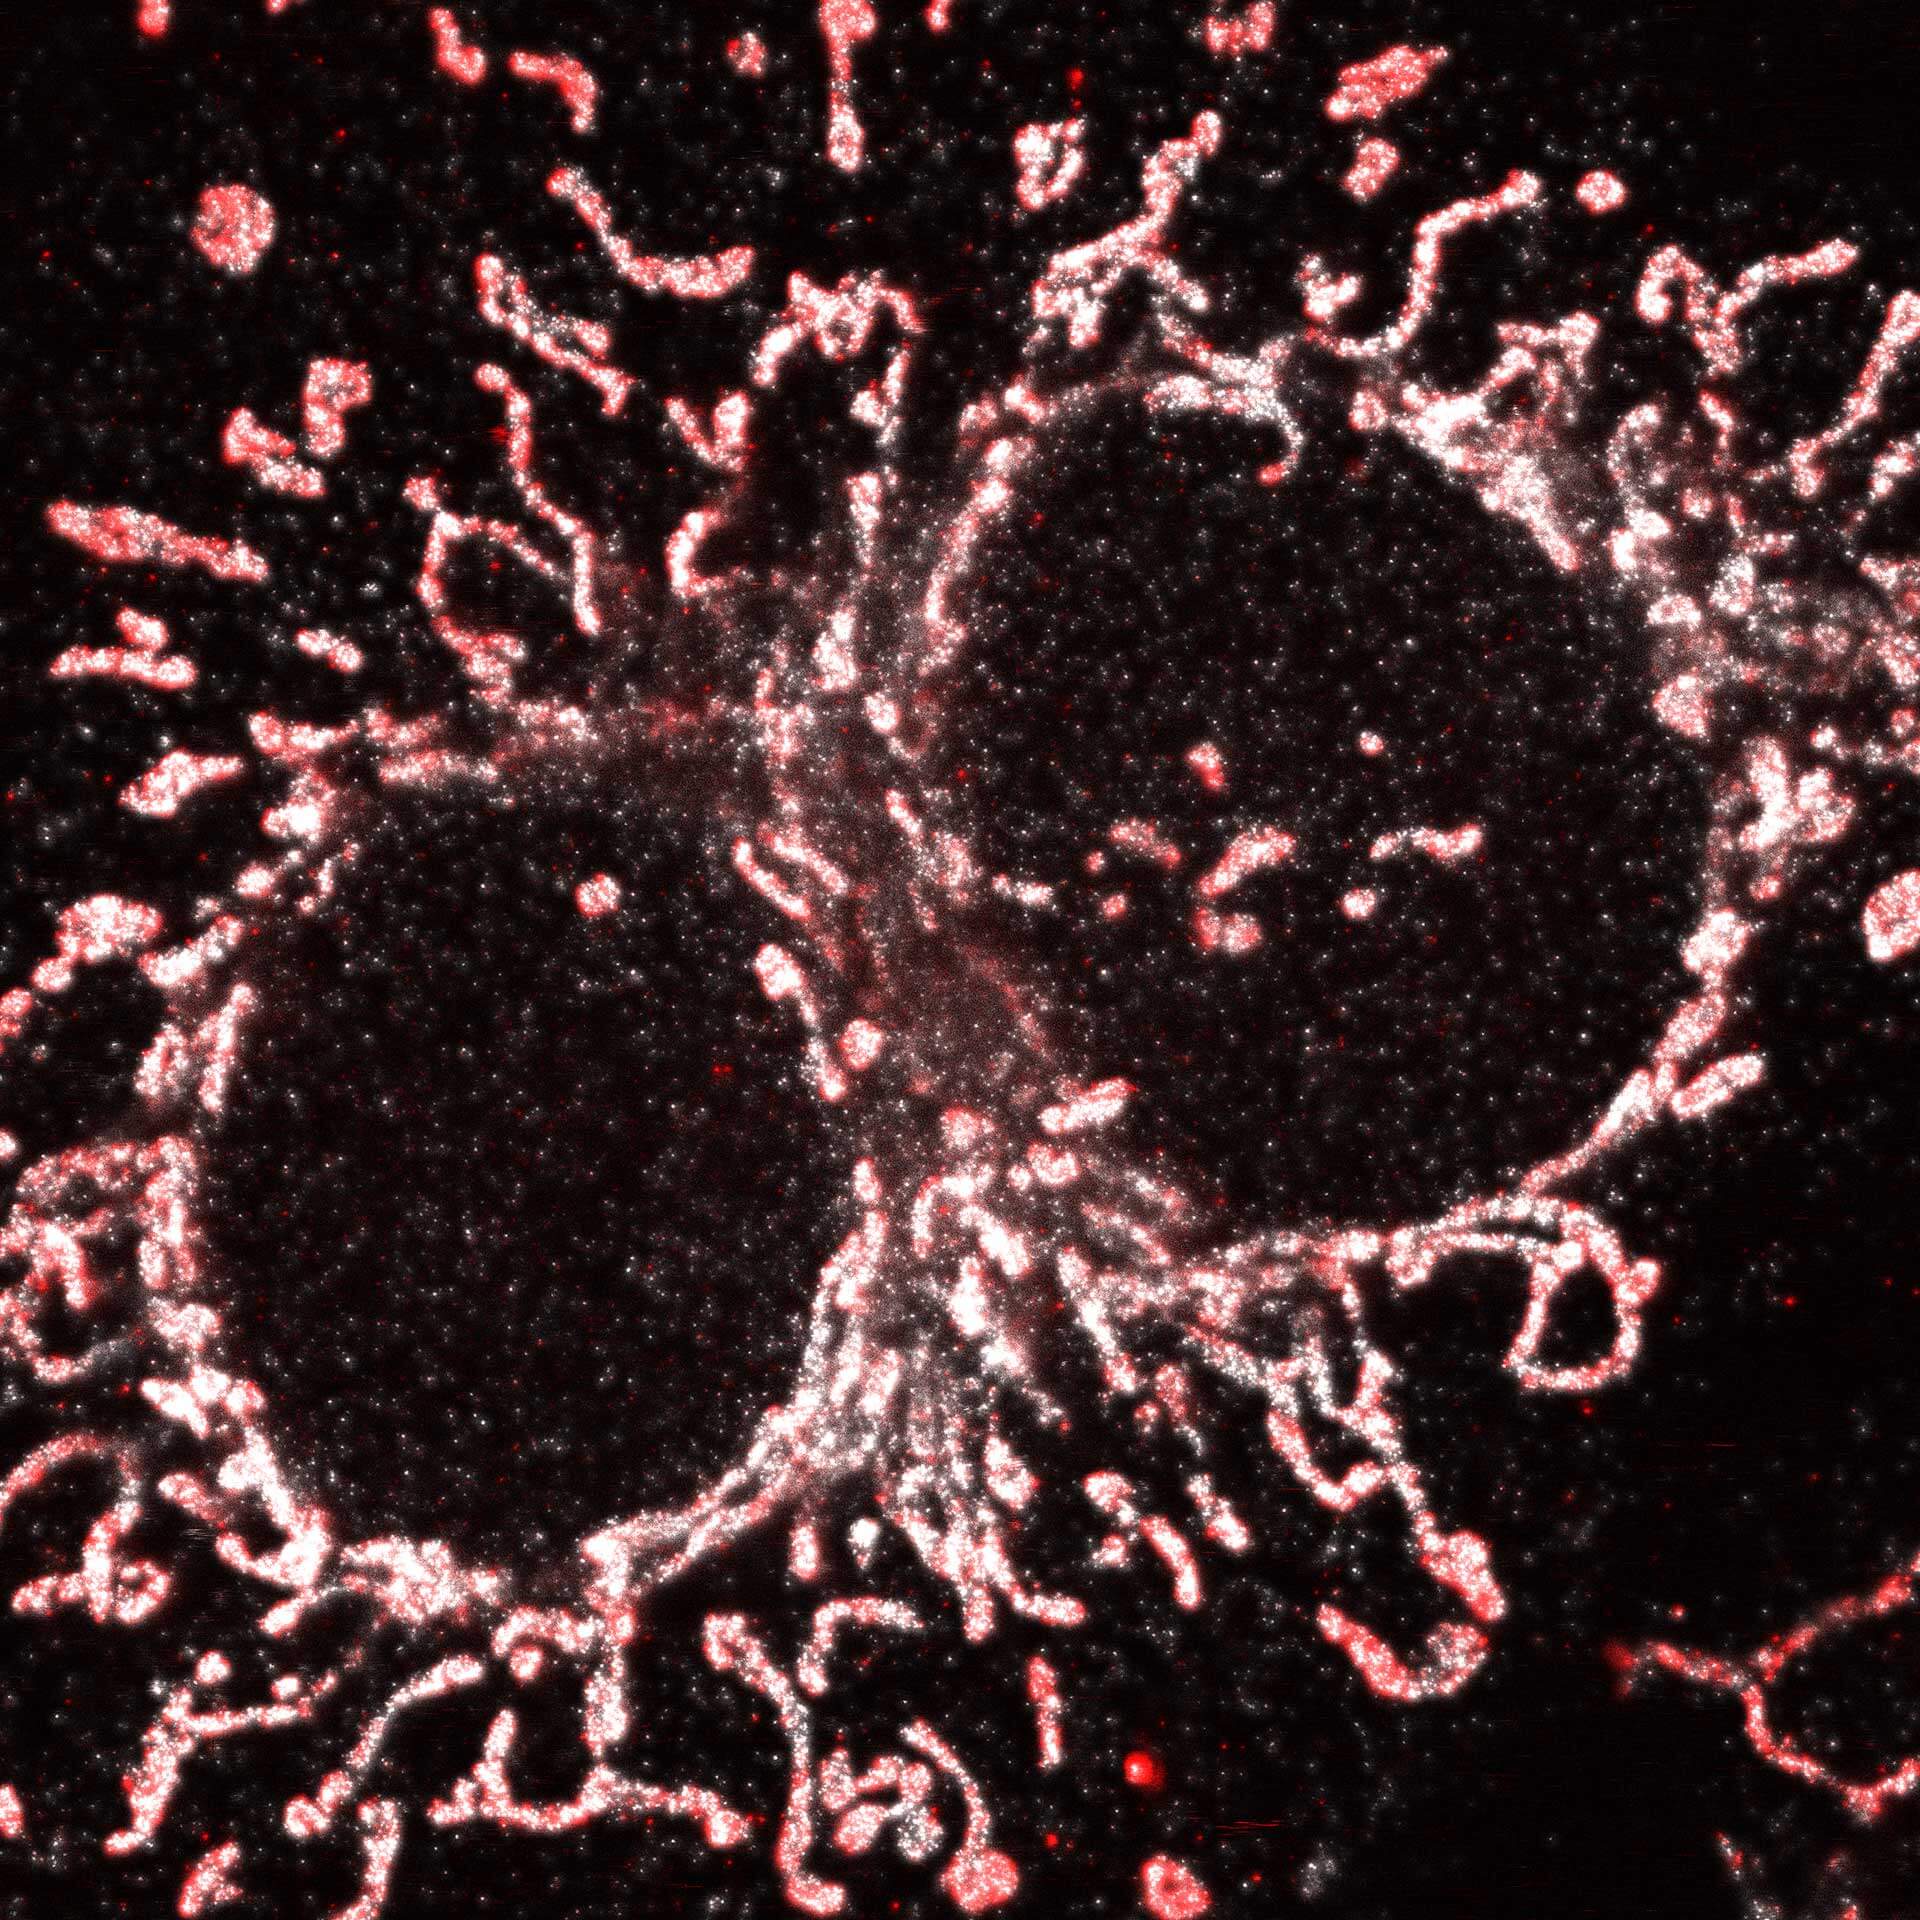 Cultured mammalian cell immunostained for an inner and outer mitochondrial membrane marker.